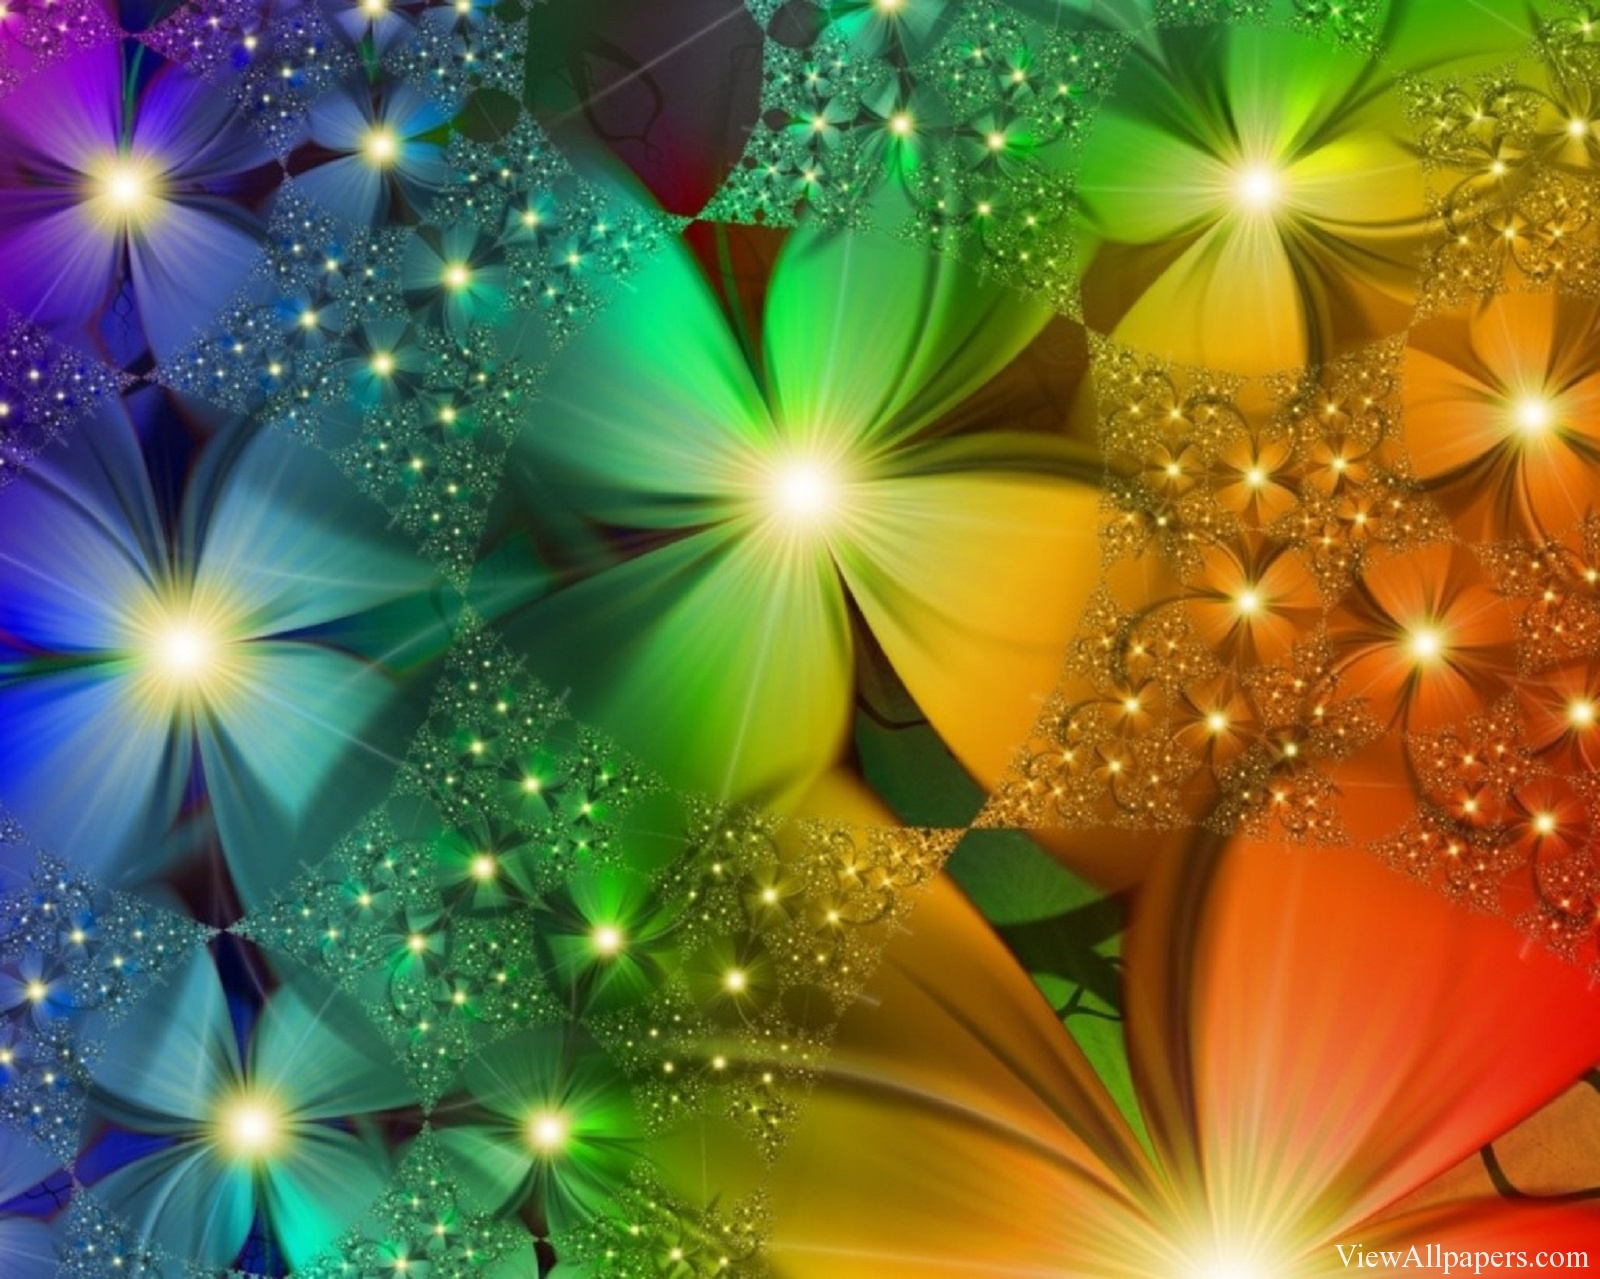 3D Wallpaper Colorful Flowers High Resolution Wallpaper Free download